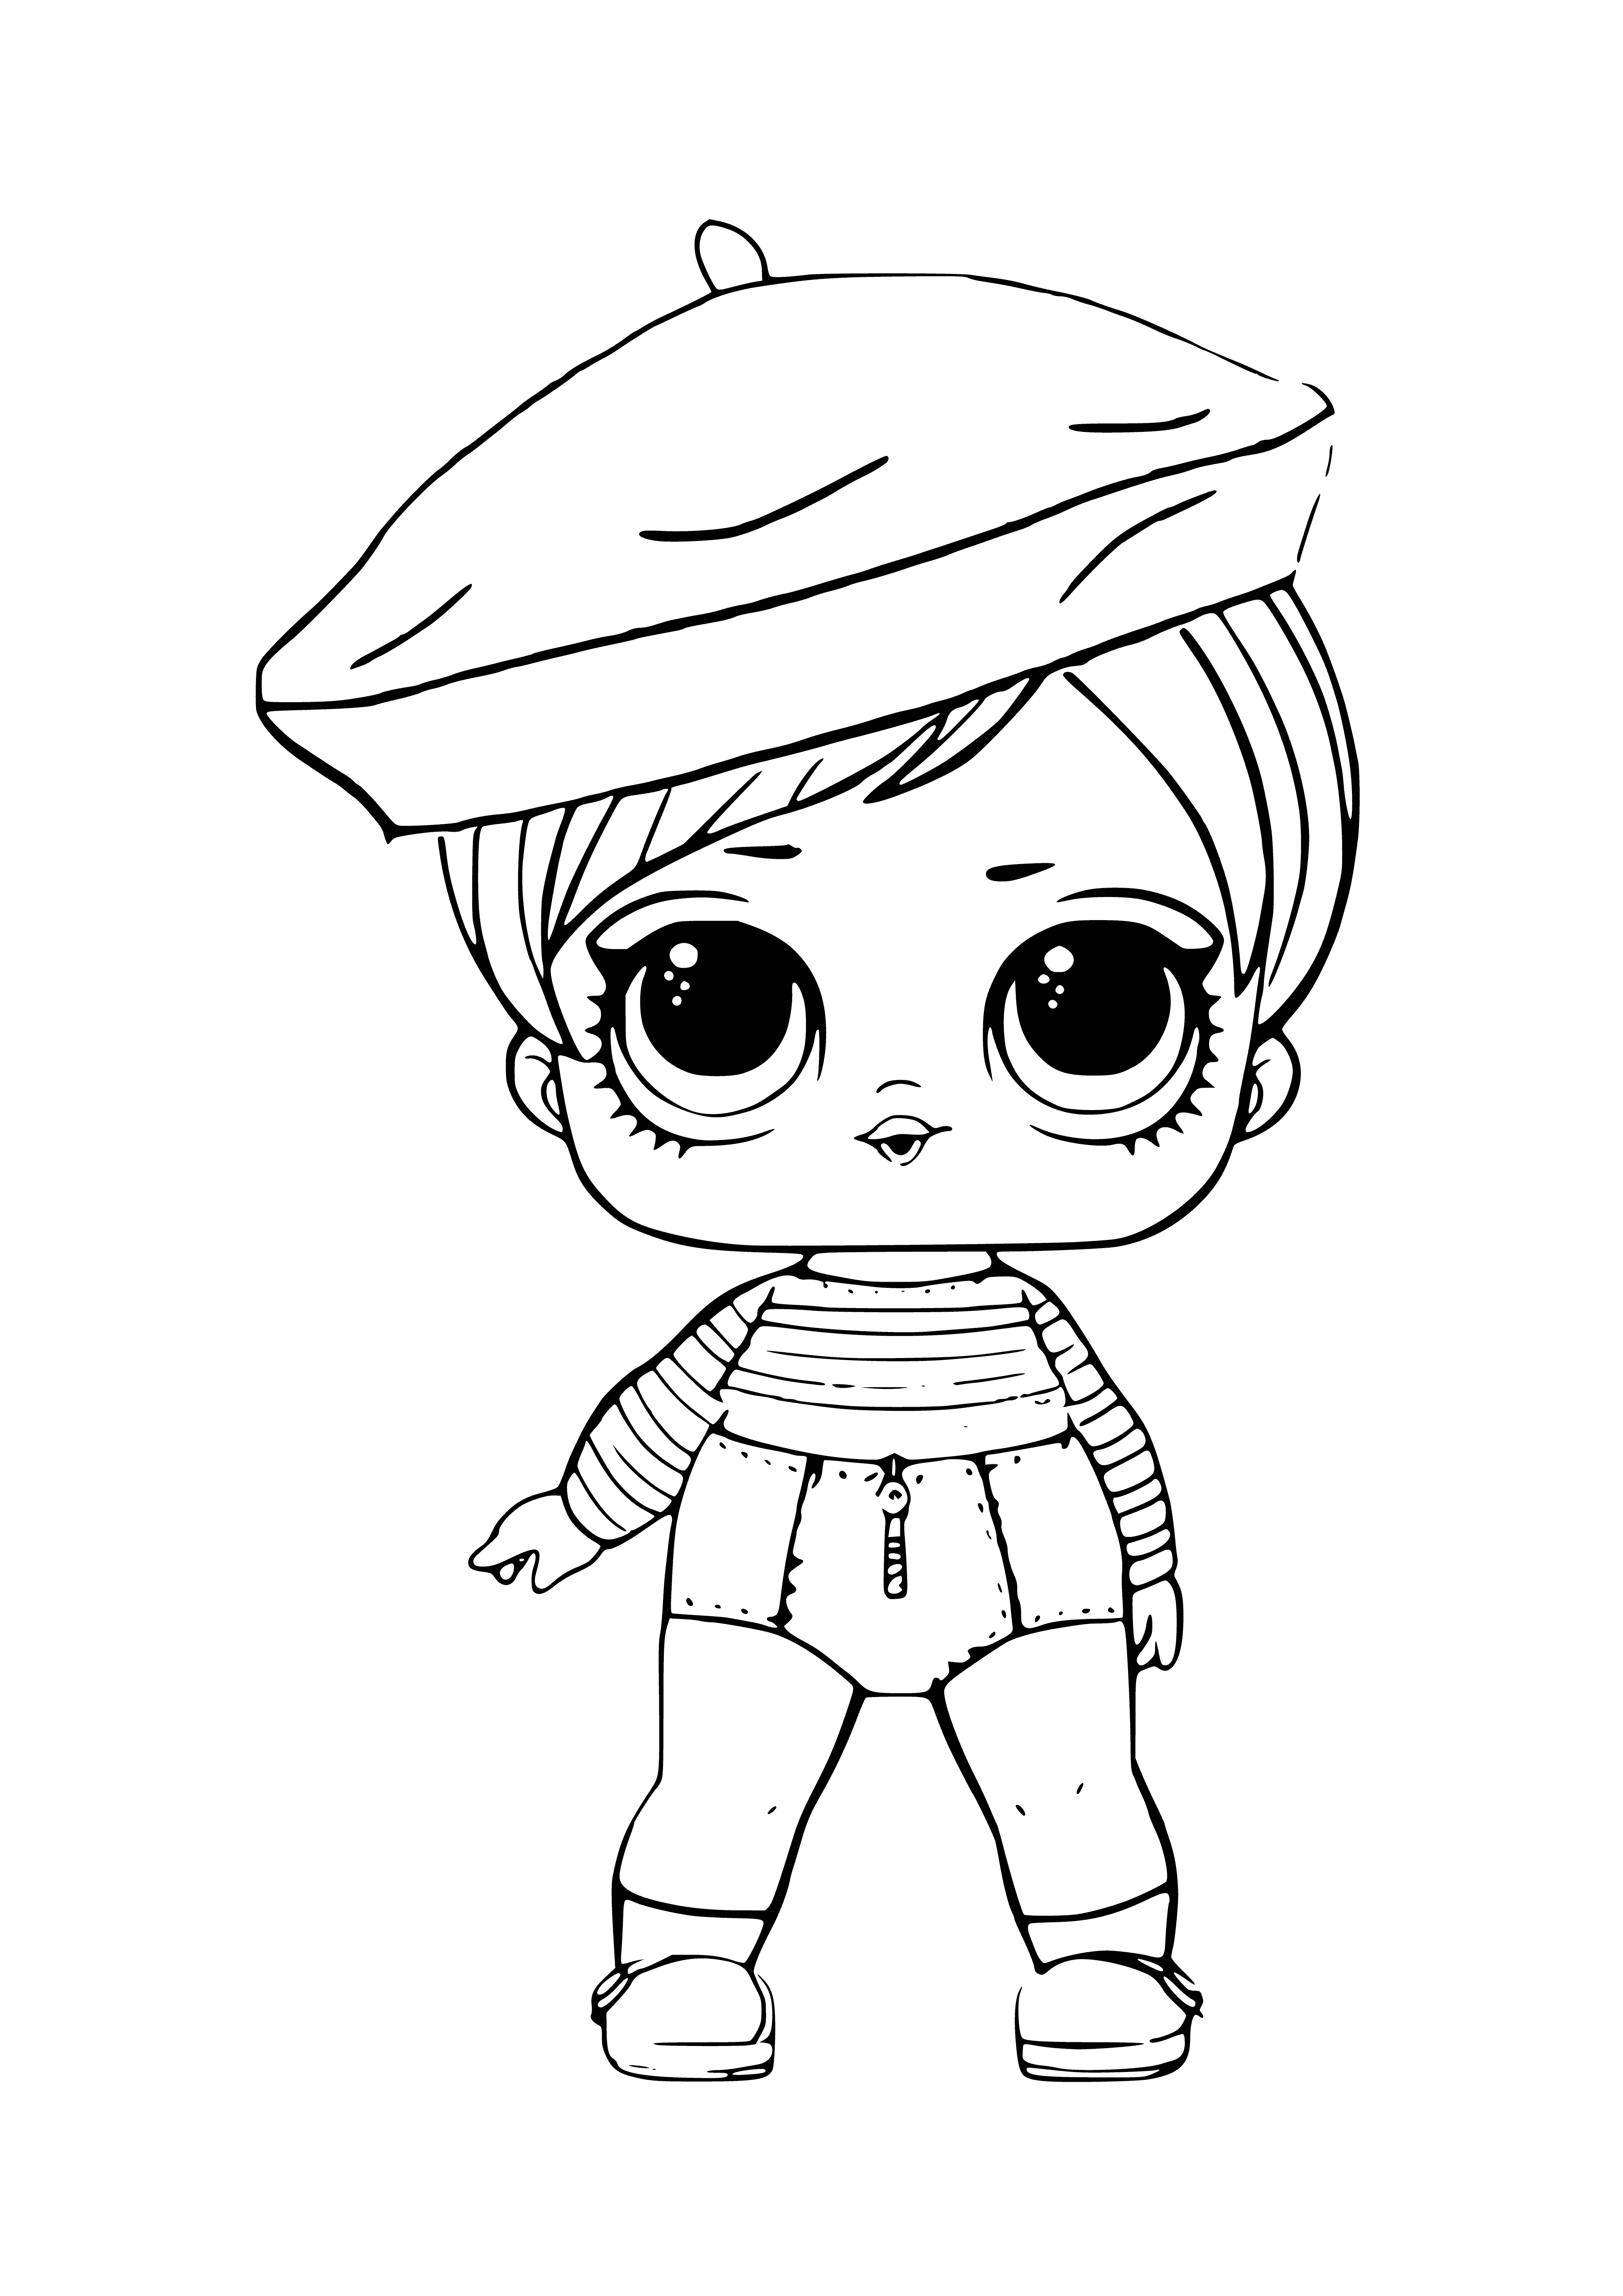 coloring page: Lady beatnik with b&w ensemble and drumsticks plays in band L.O.L - LOL Beatnik Babe confetti pop.